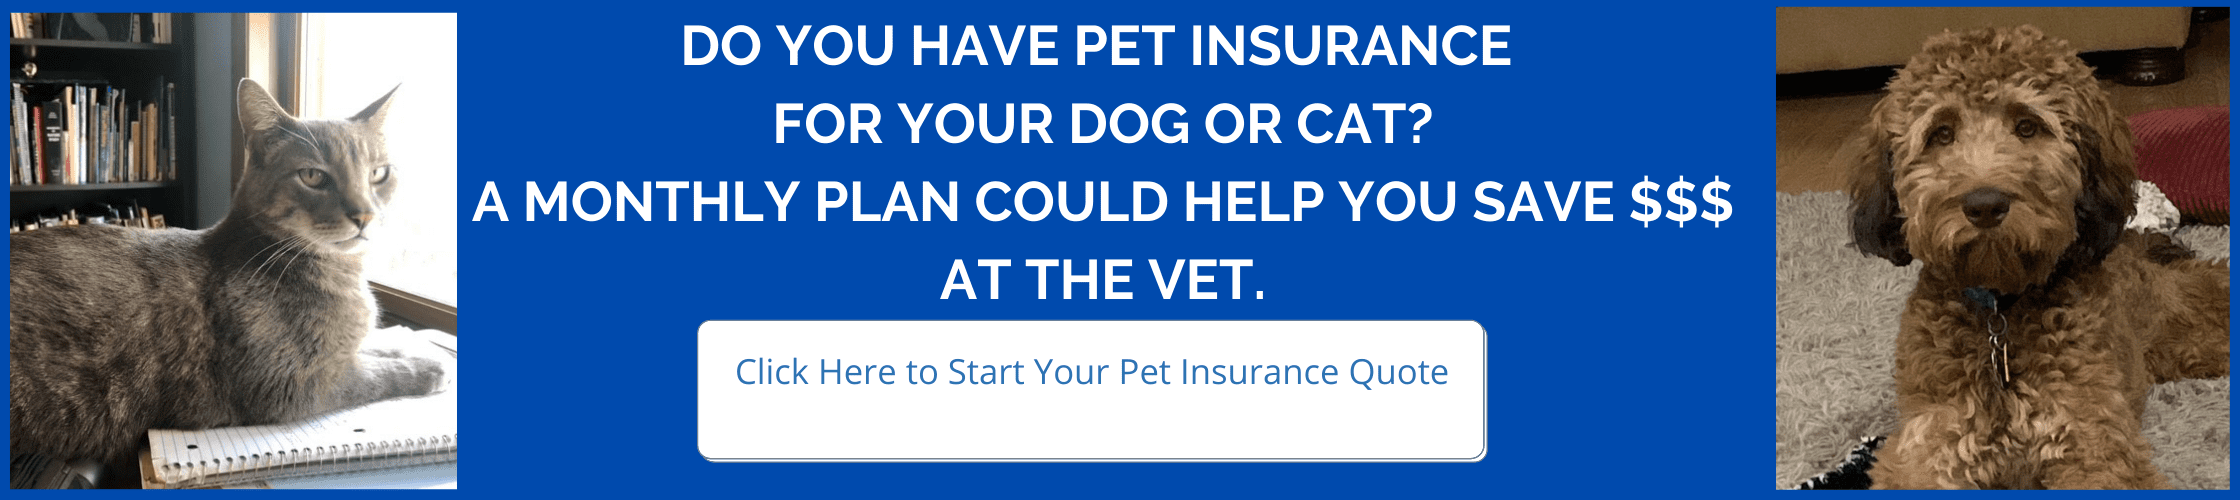 Get a pet insurance quote!